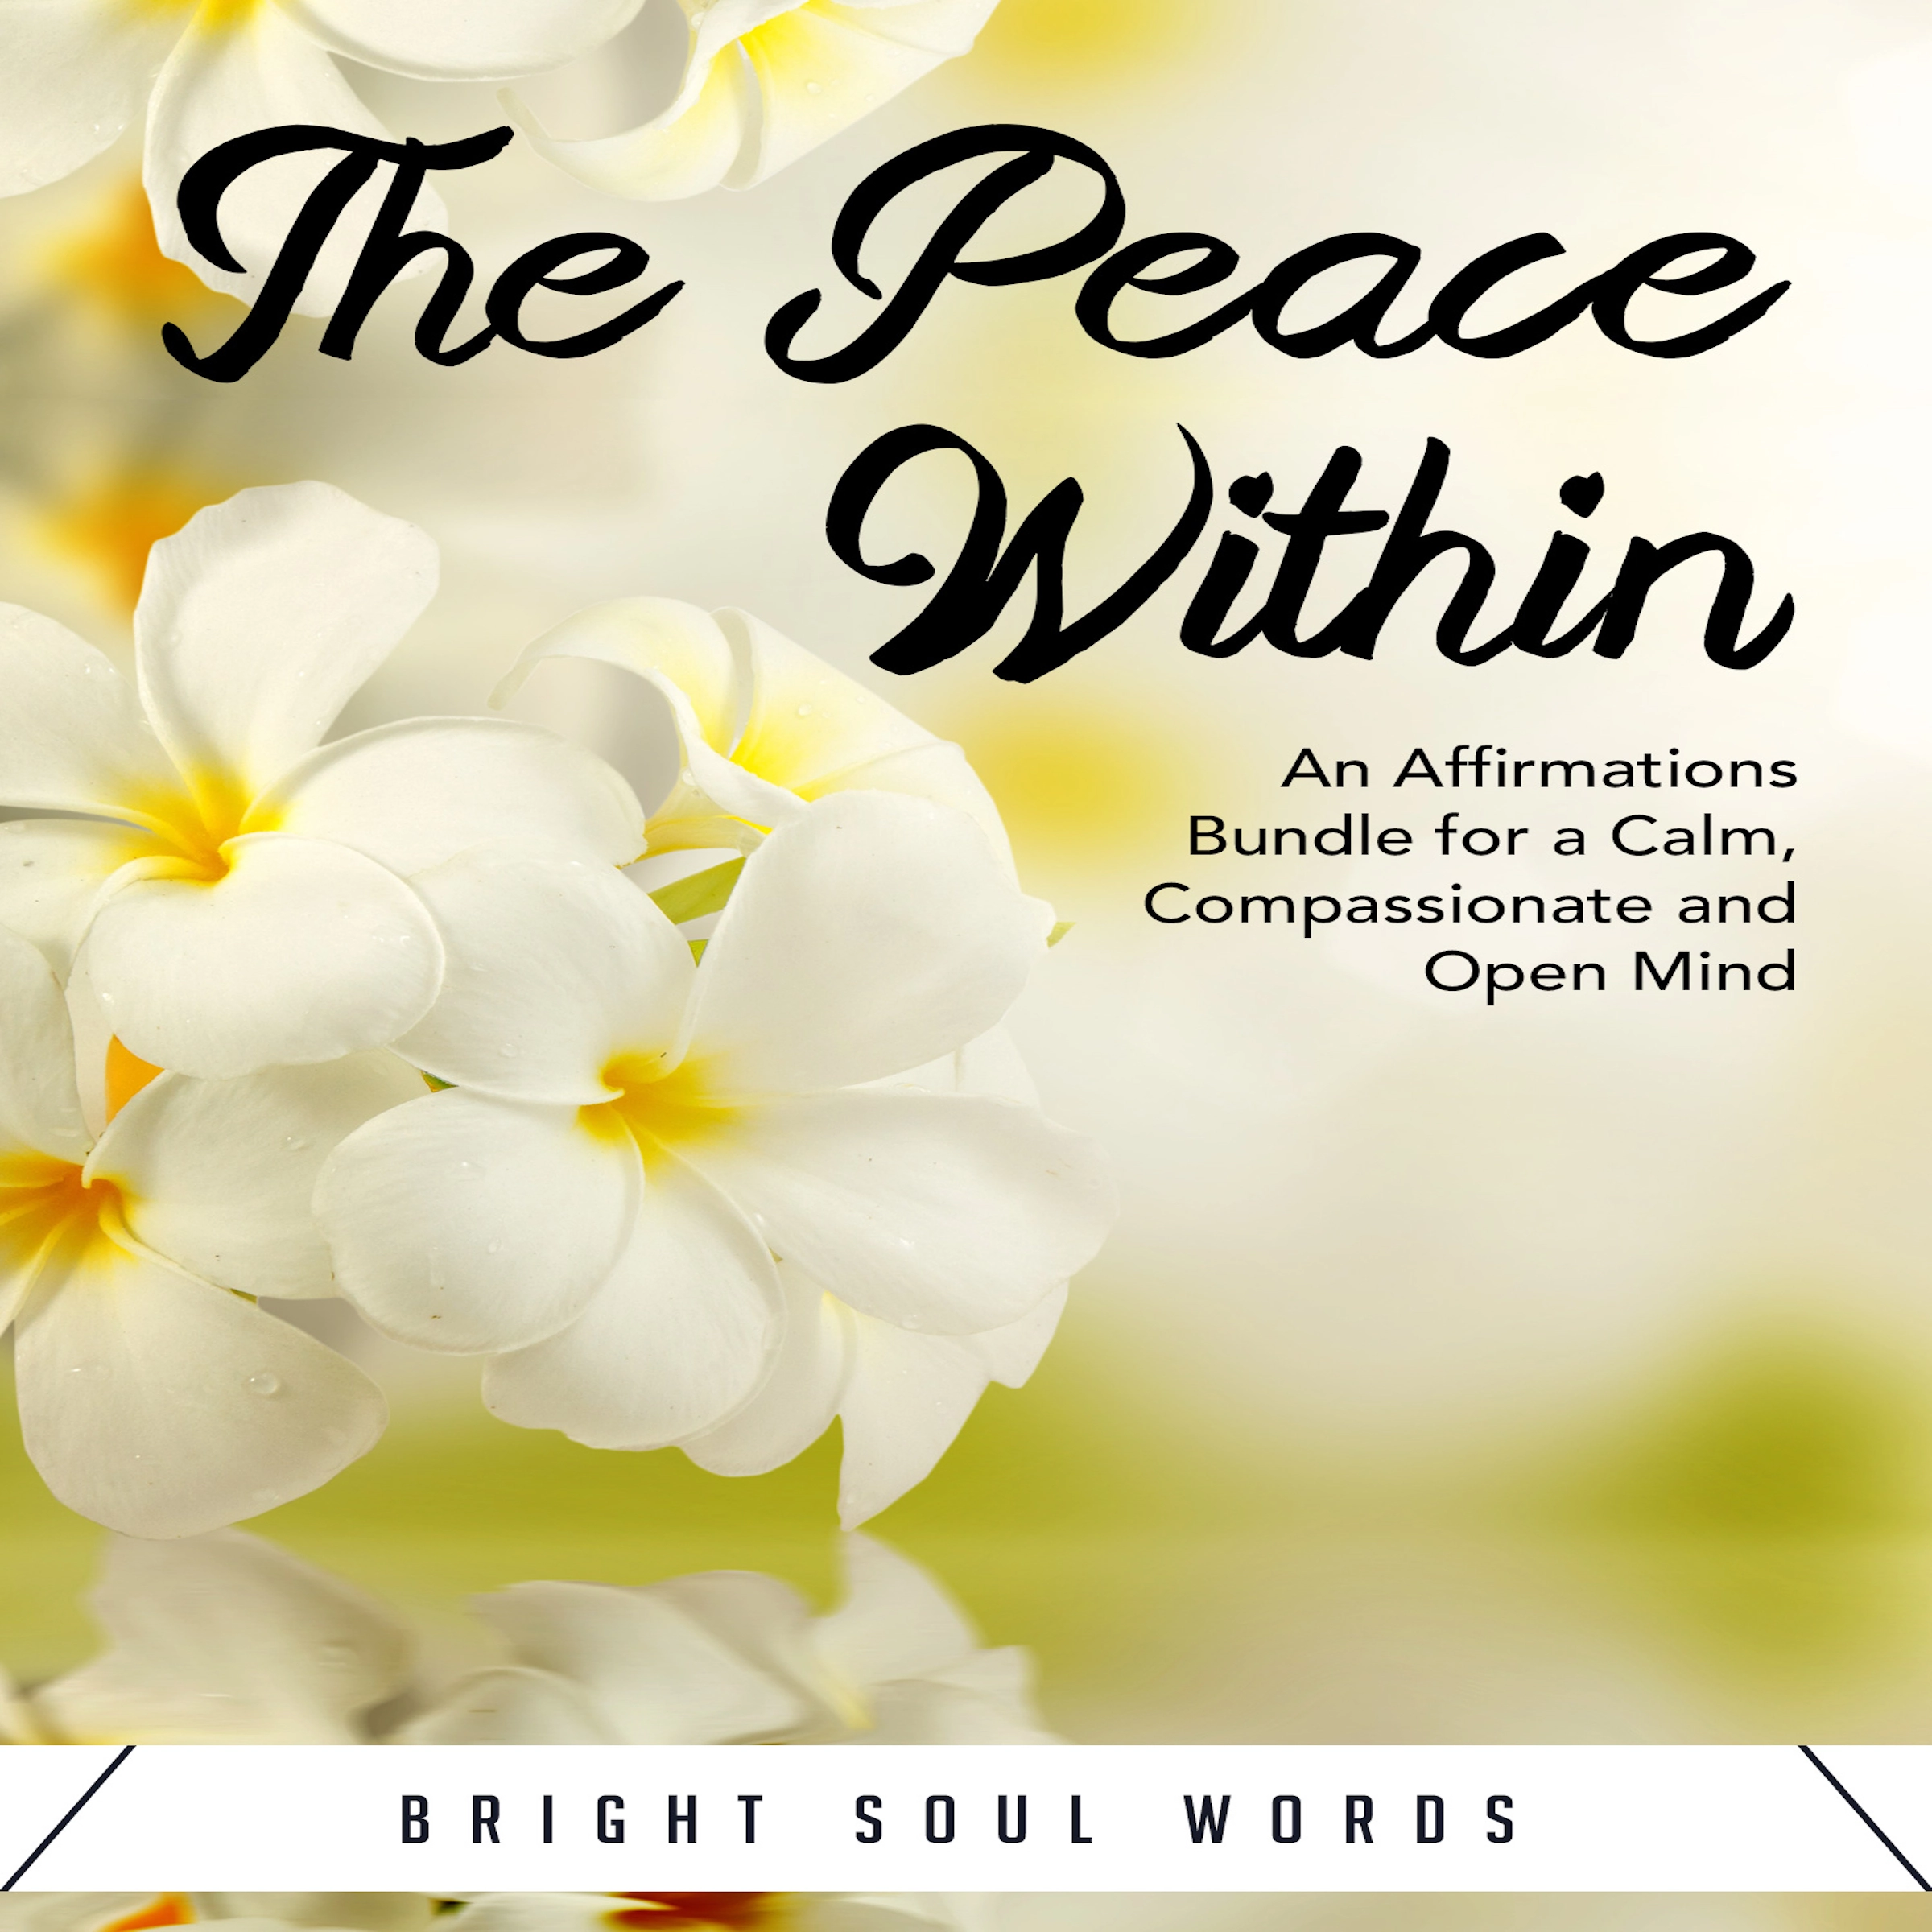 The Peace Within: An Affirmations Bundle for a Calm, Compassionate and Open Mind Audiobook by Bright Soul Words